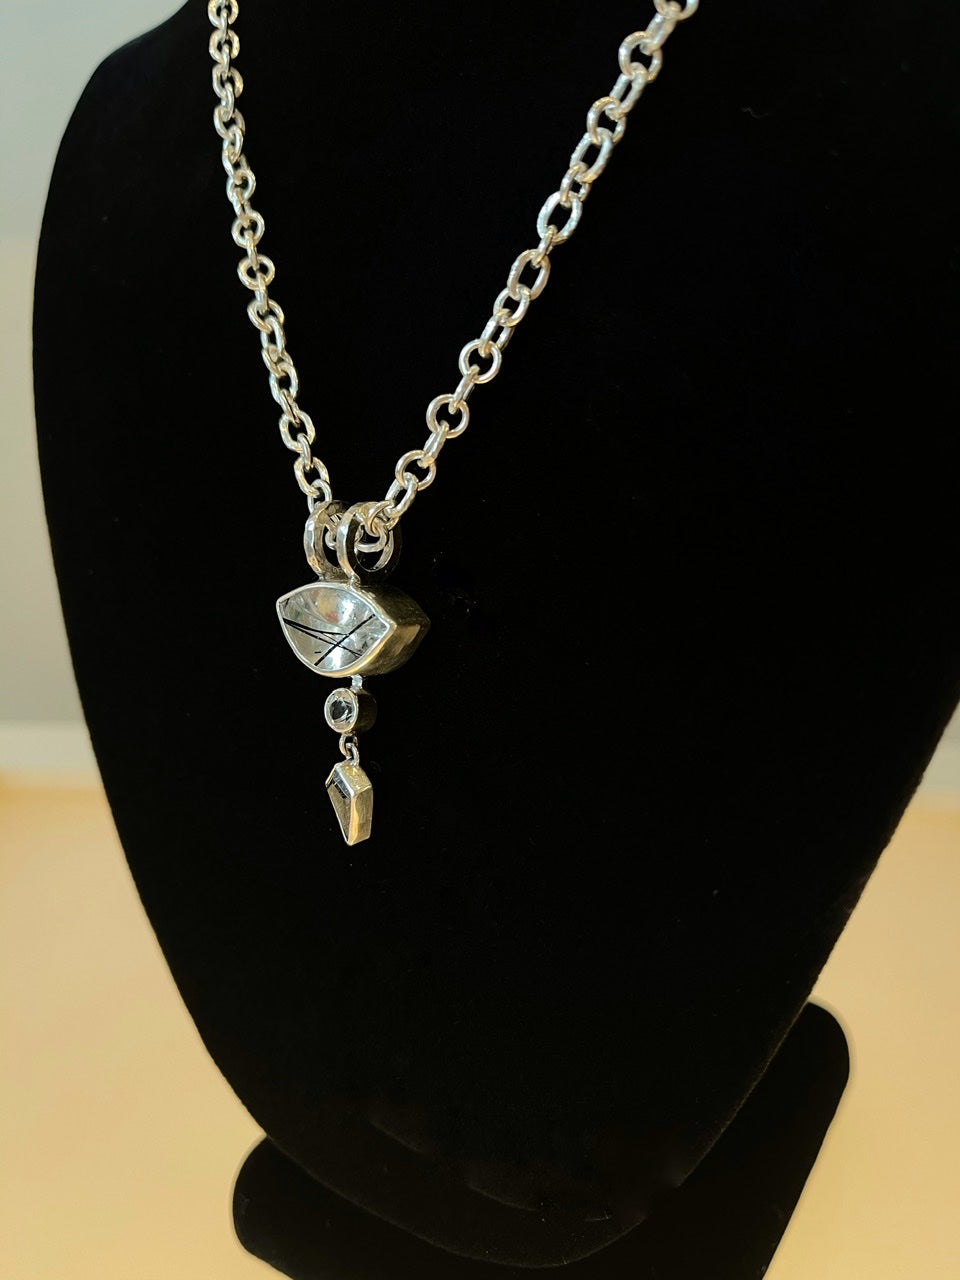 Rutilated Quartz, Topaz and Zircon Necklace with Handmade Hammered Chain